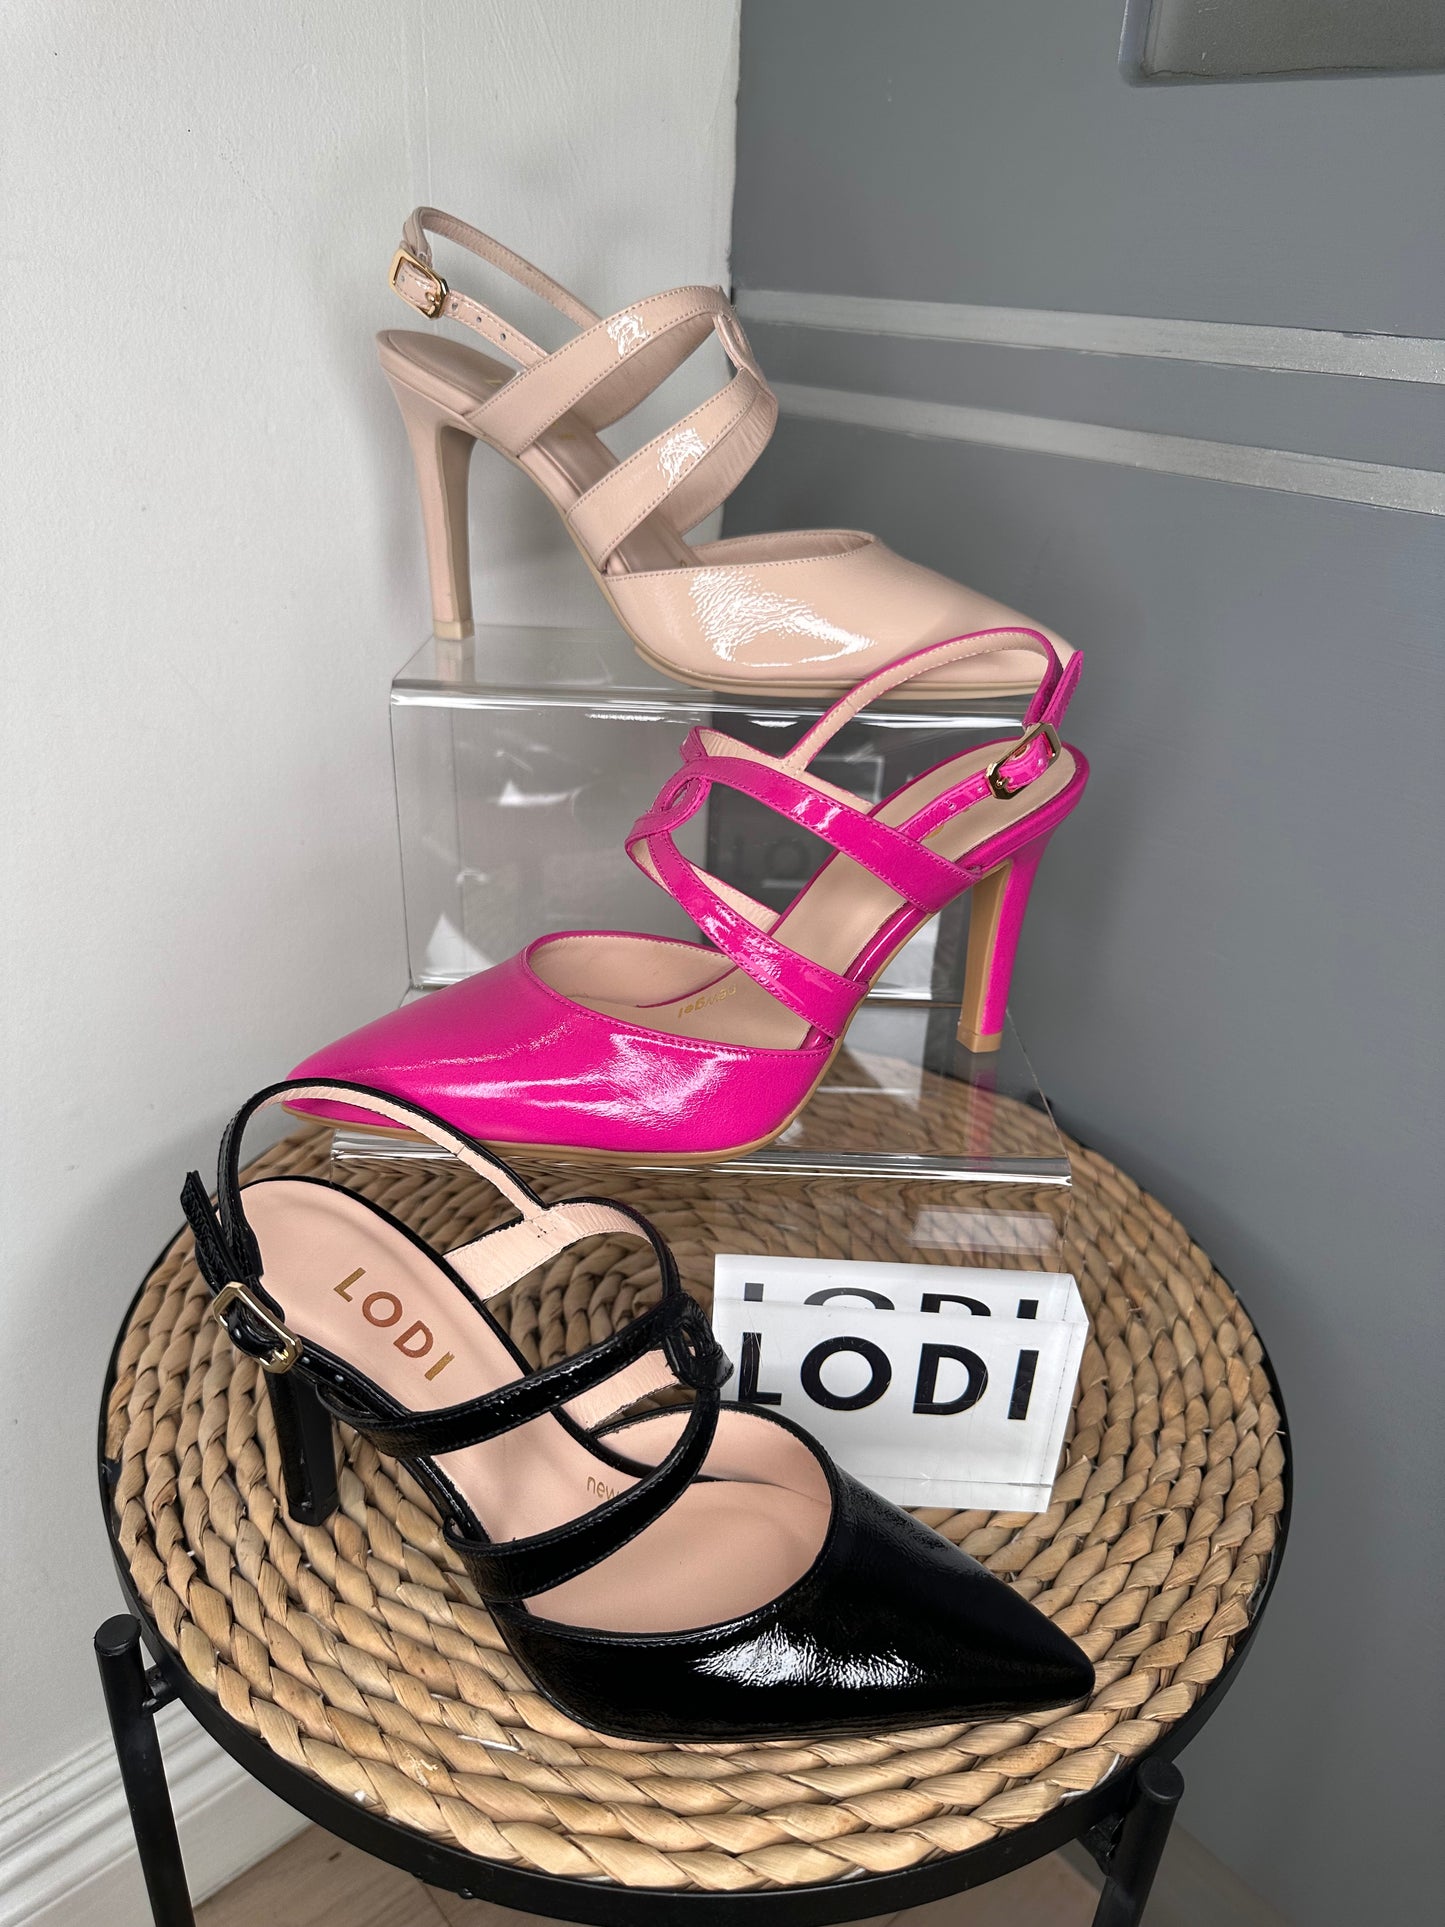 Lodi - Rianes Hot Pink Nappa Leather Pointy Toe Strappy Sling Back Court Shoe